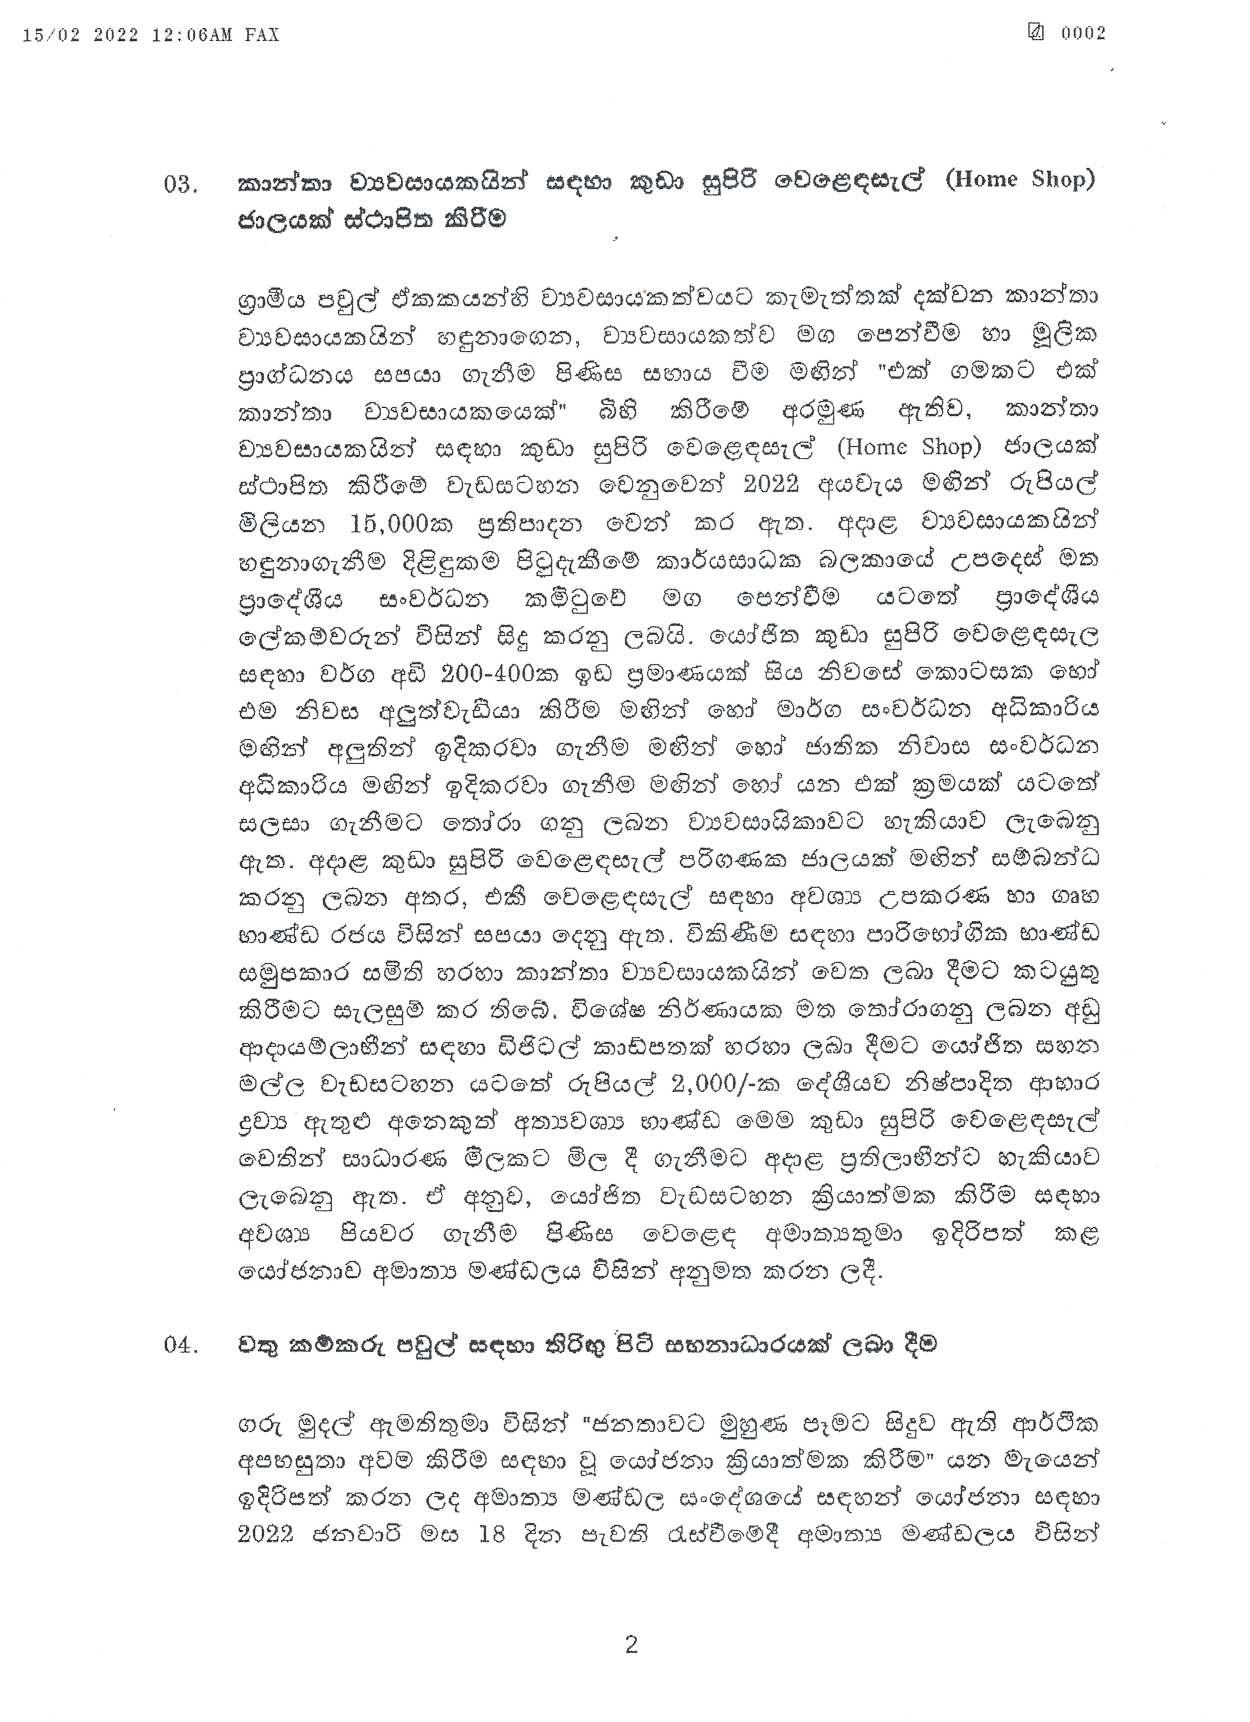 Cabinet Decision on 14.02.2022 page 002